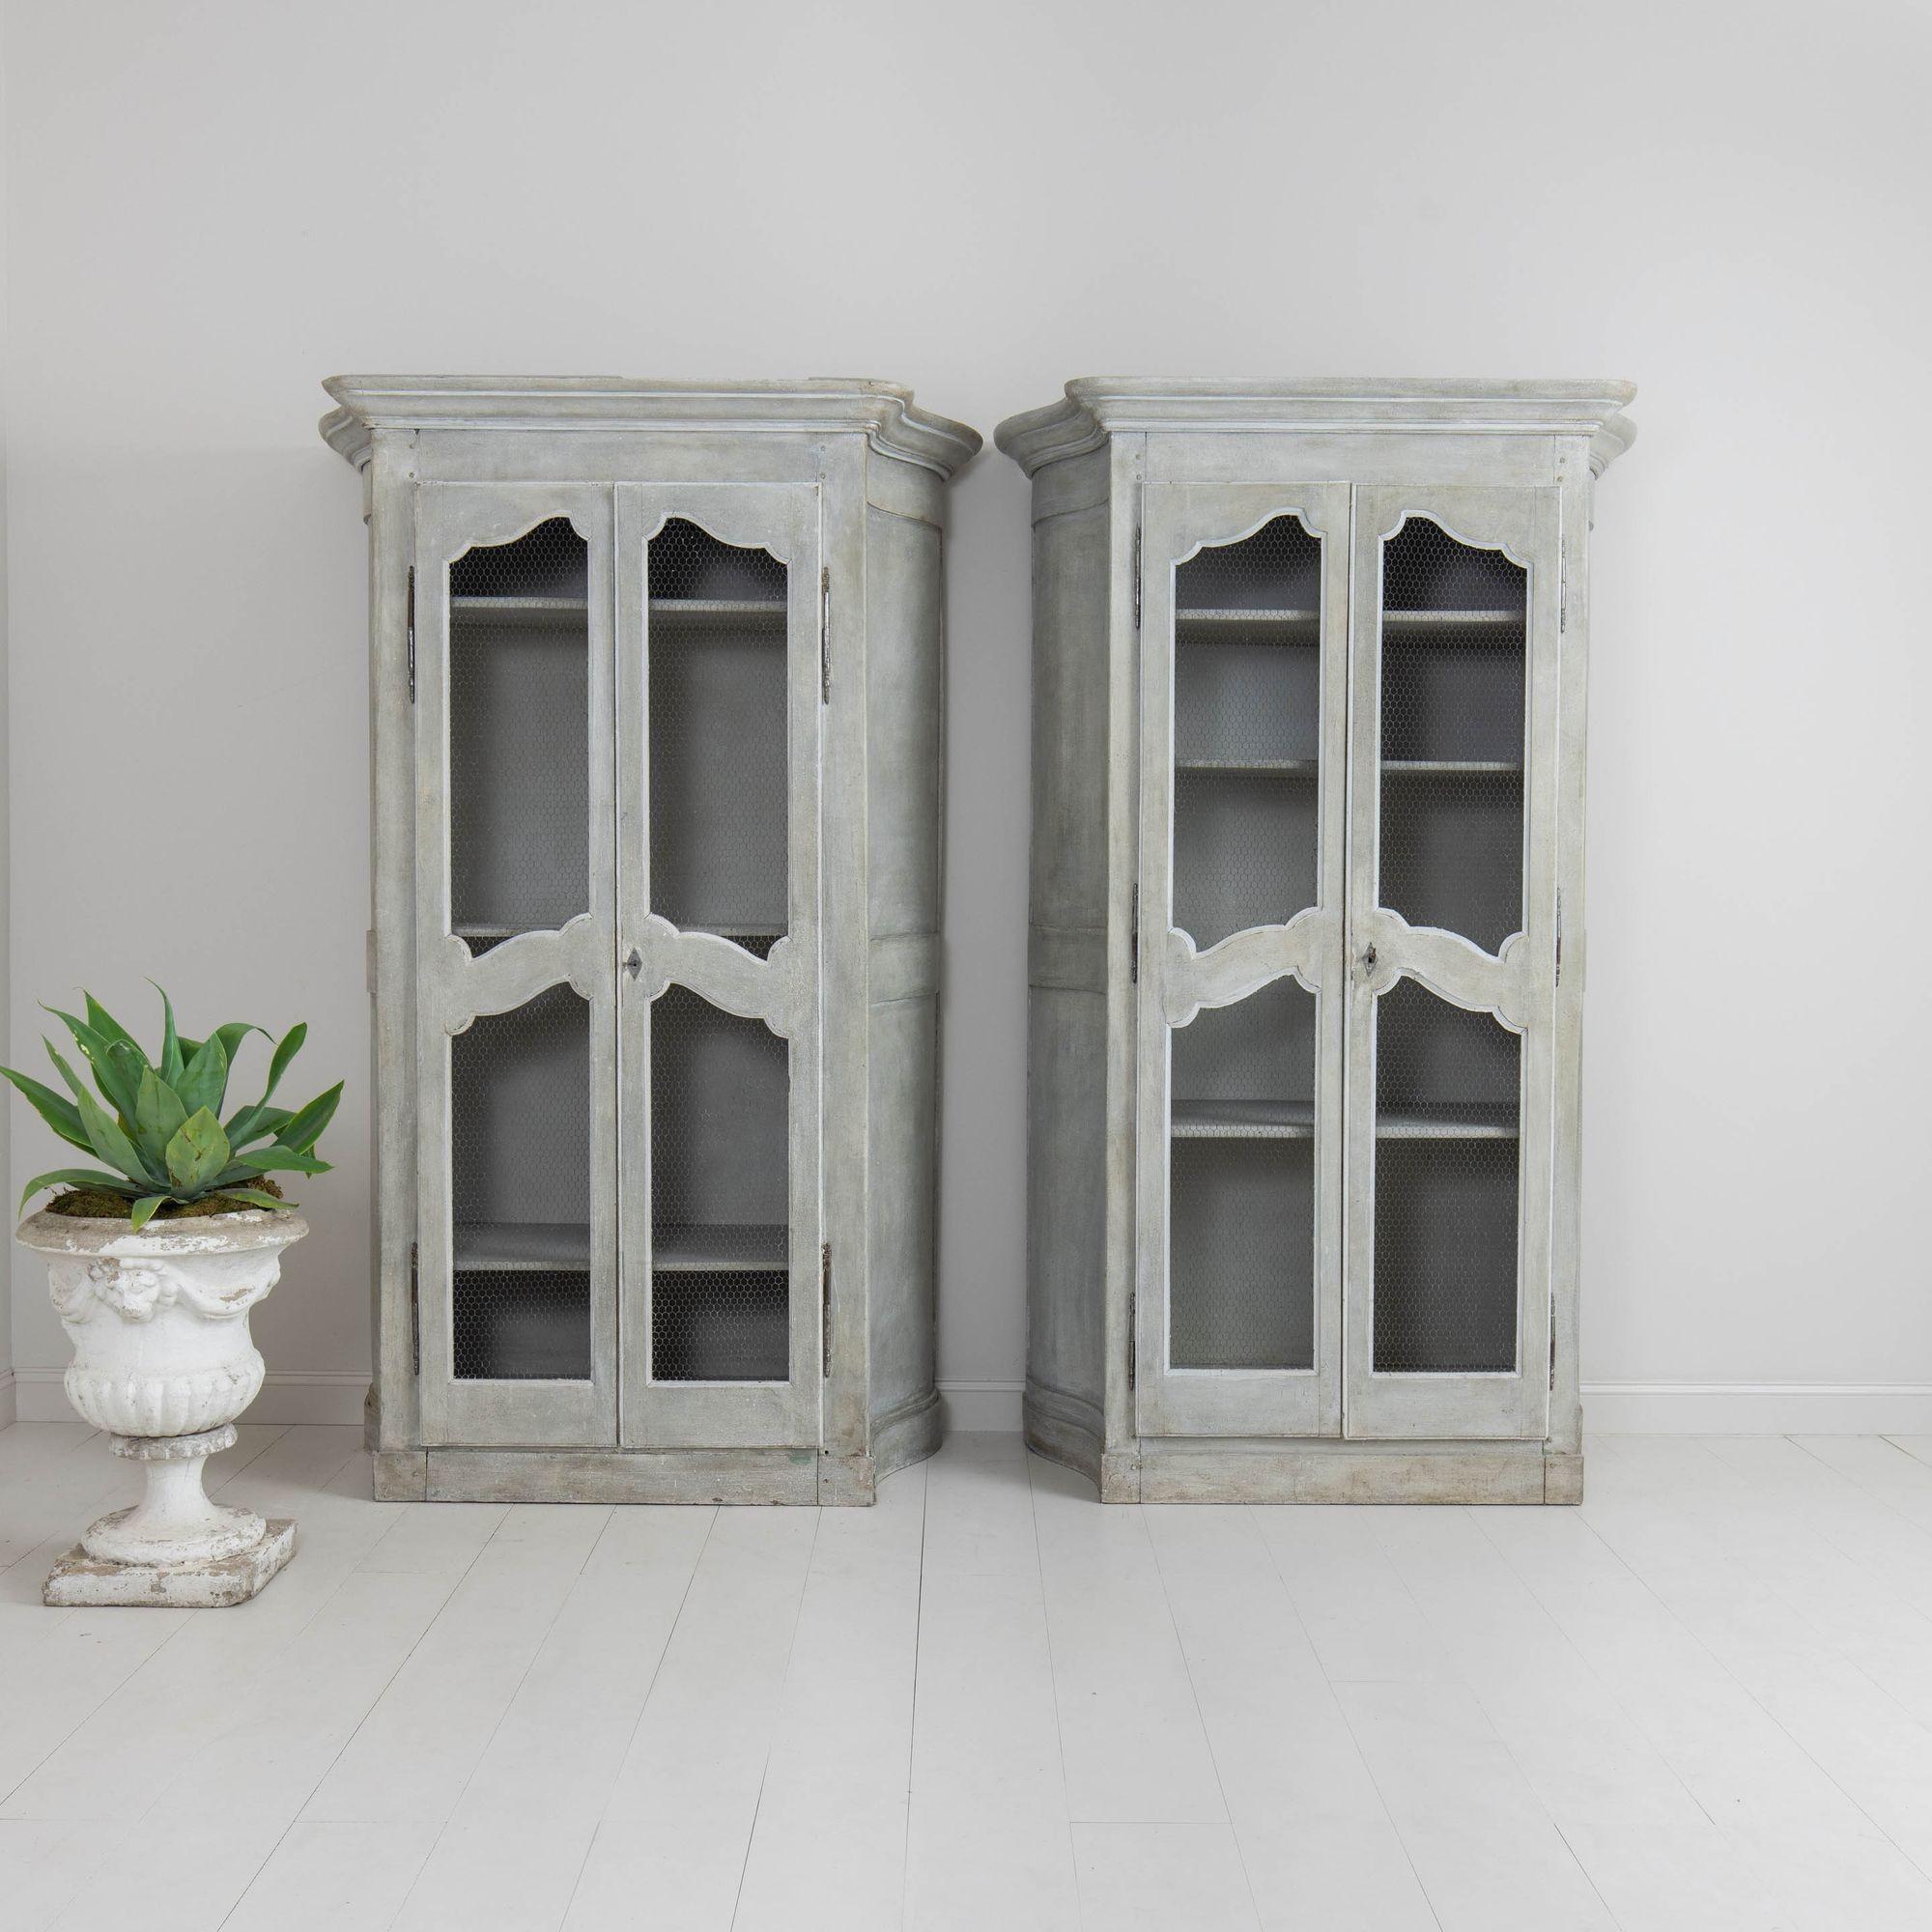 A matched pair of grand, French two-door cabinets from the 19th century with wire mesh door fronts and canted serpentine sides, supported by shaped box plinths. Circa 1840. There are three adjustable shelves in each cabinet. The cabinets disassemble